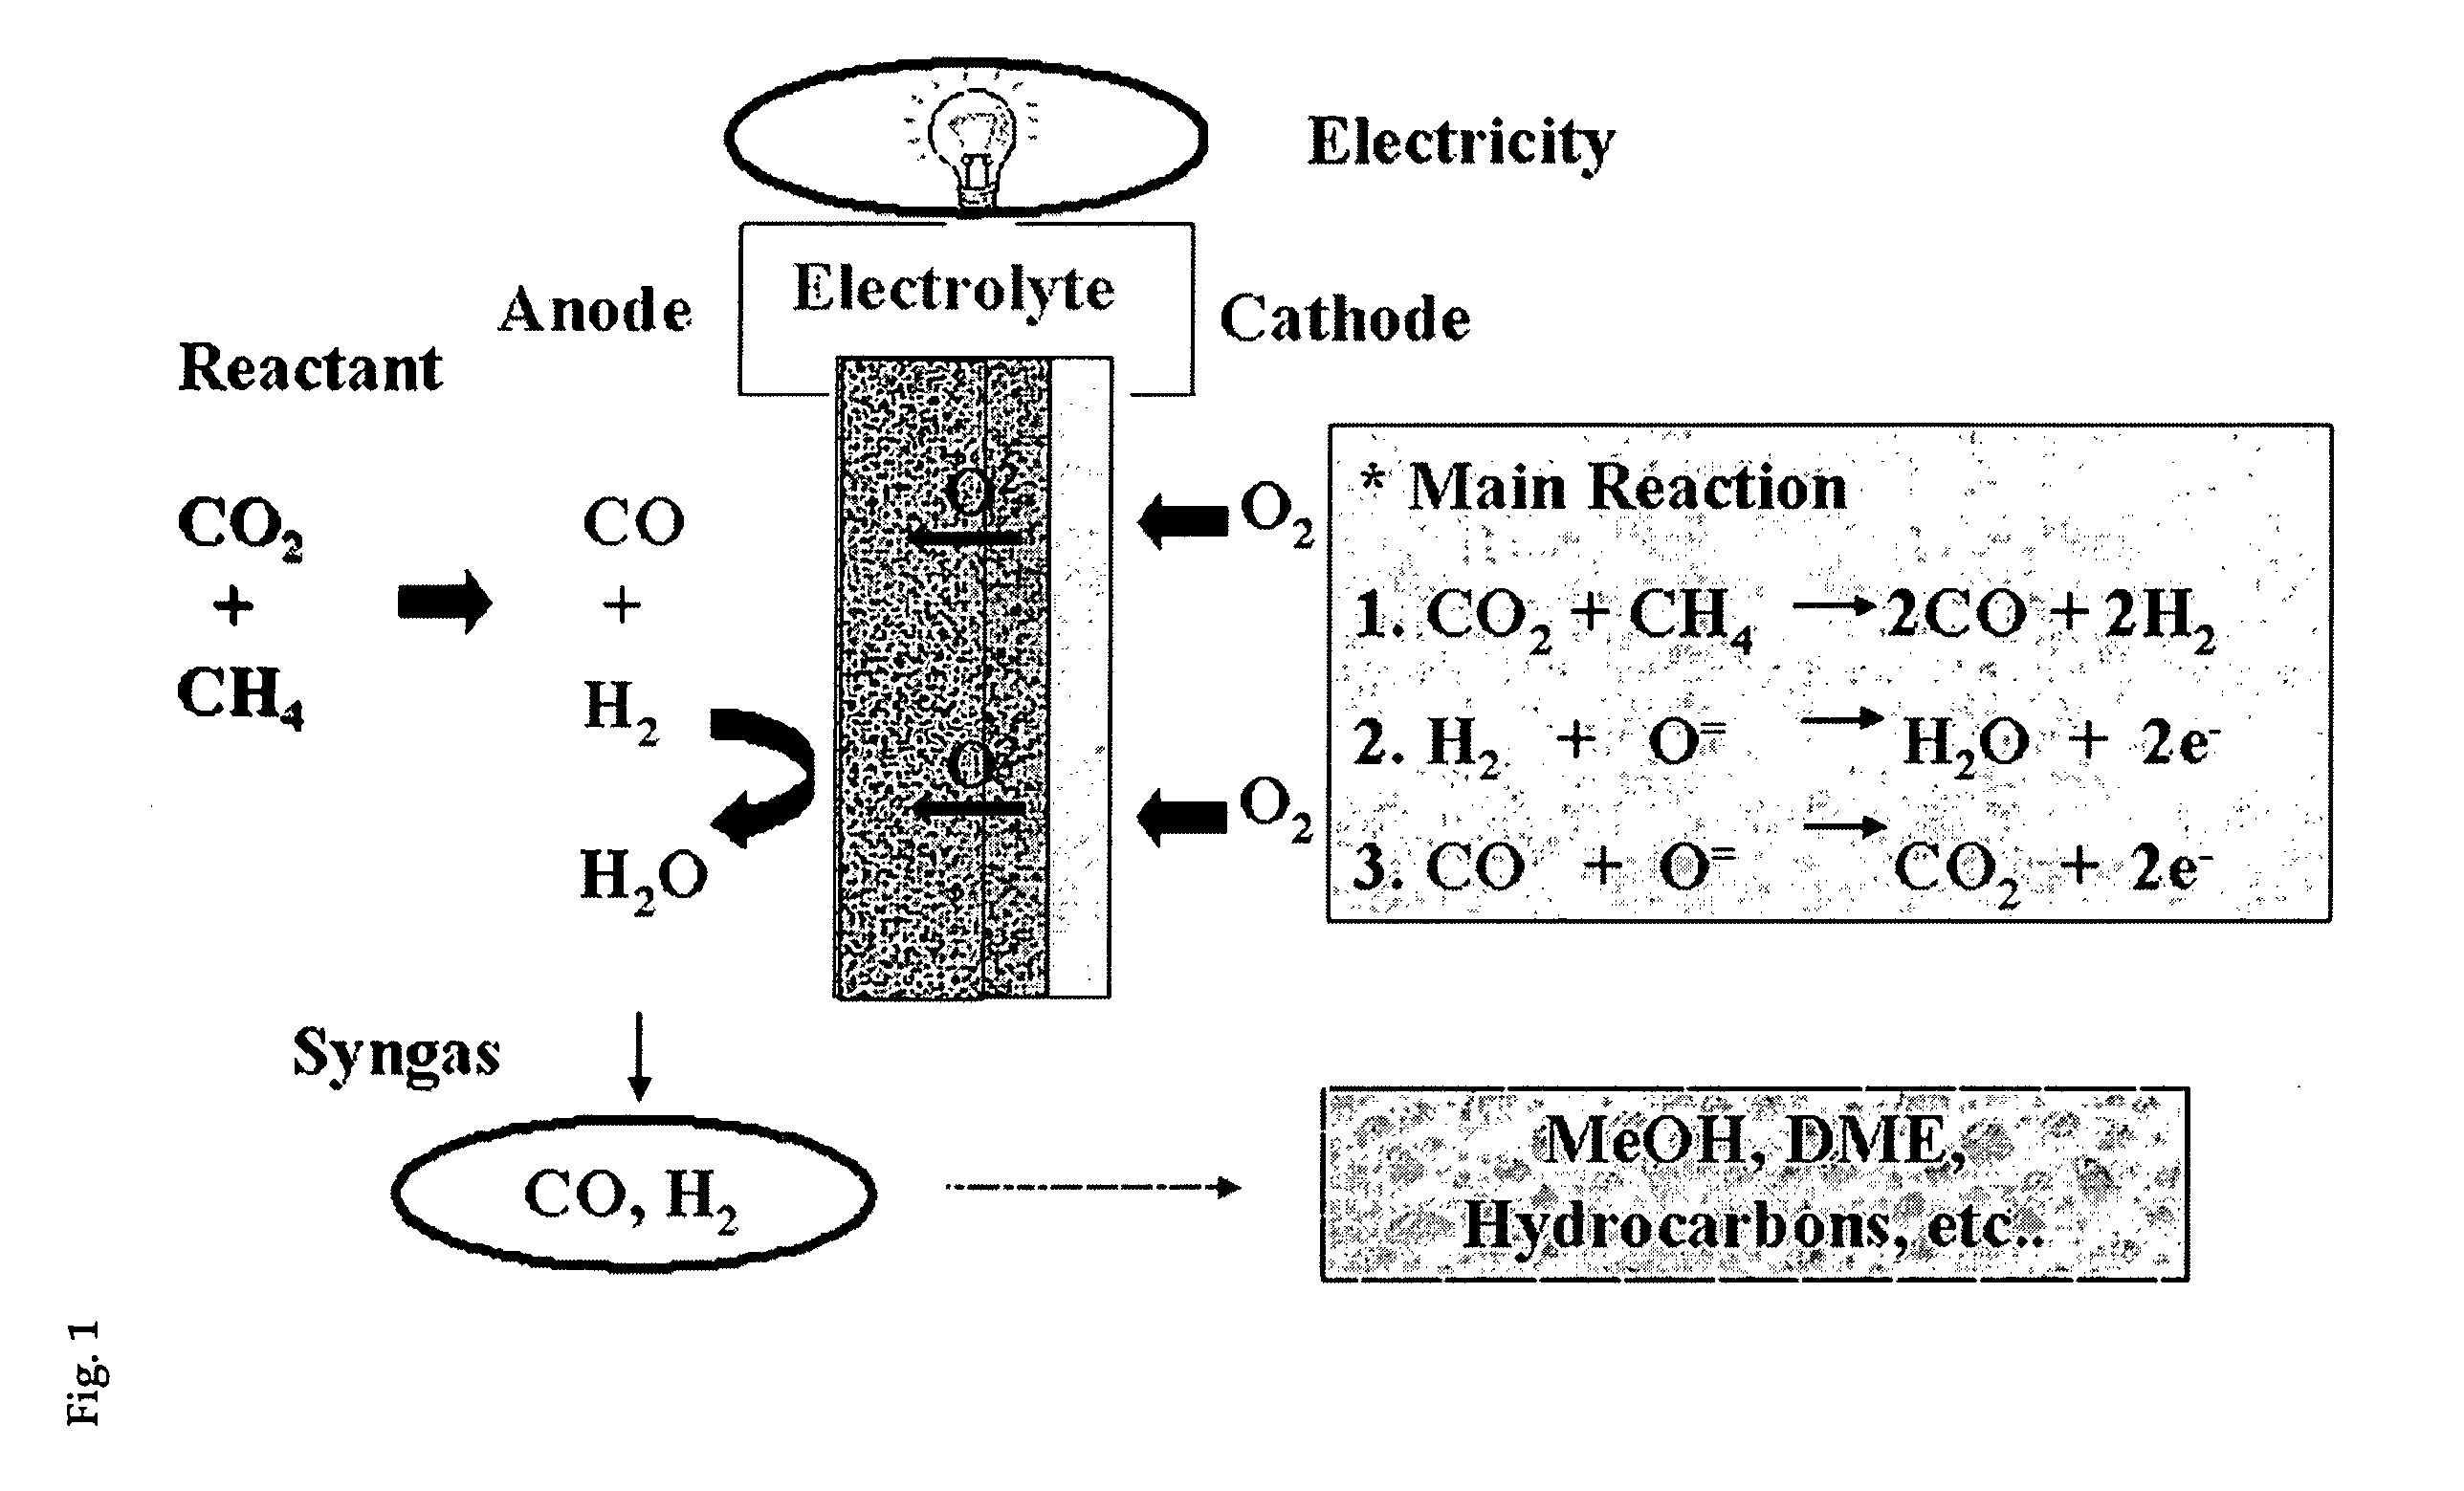 Solid oxide fuel cell (SOFC) for coproducing syngas and electricity by the internal reforming of carbon dioxide by hydrocarbons and electrochemical membrane reactor system